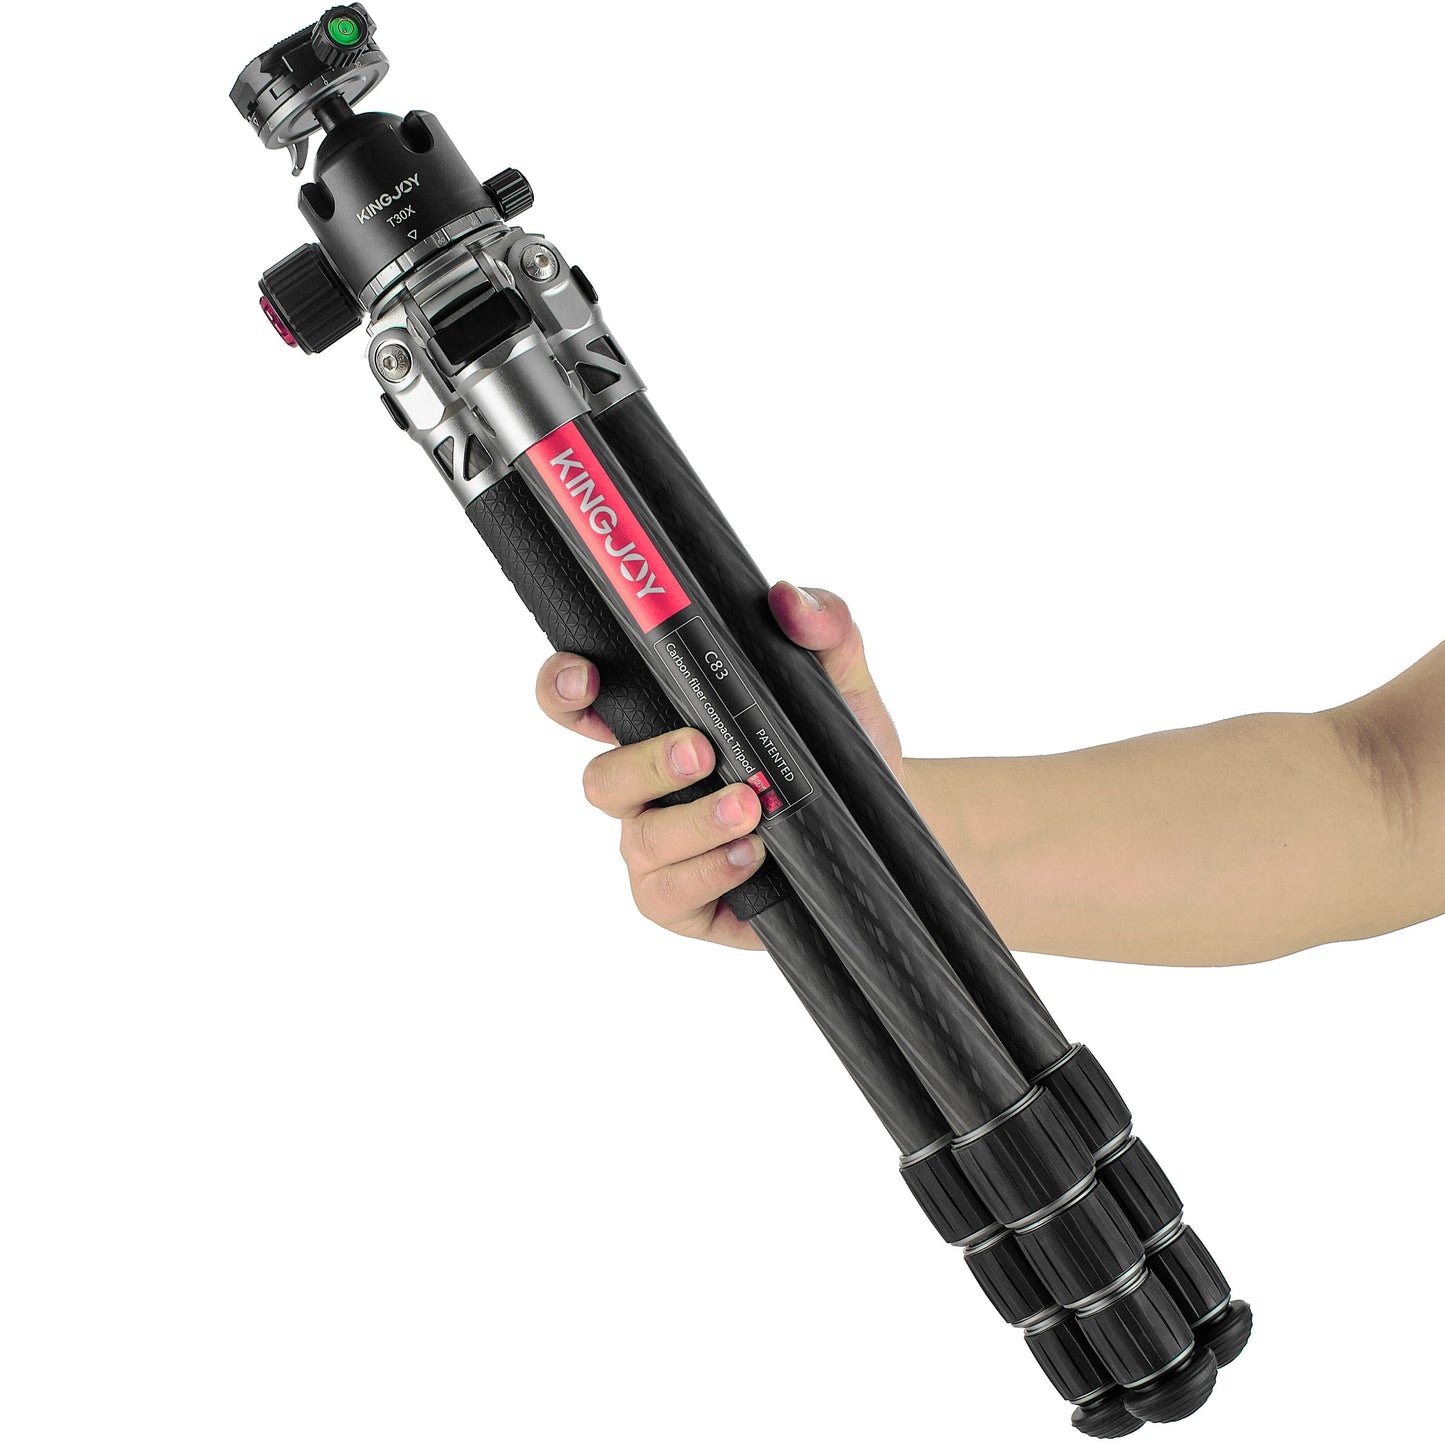 Kingjoy C83 carbon fiber tripod-4 section, 54in, 3.9lbs, without center column